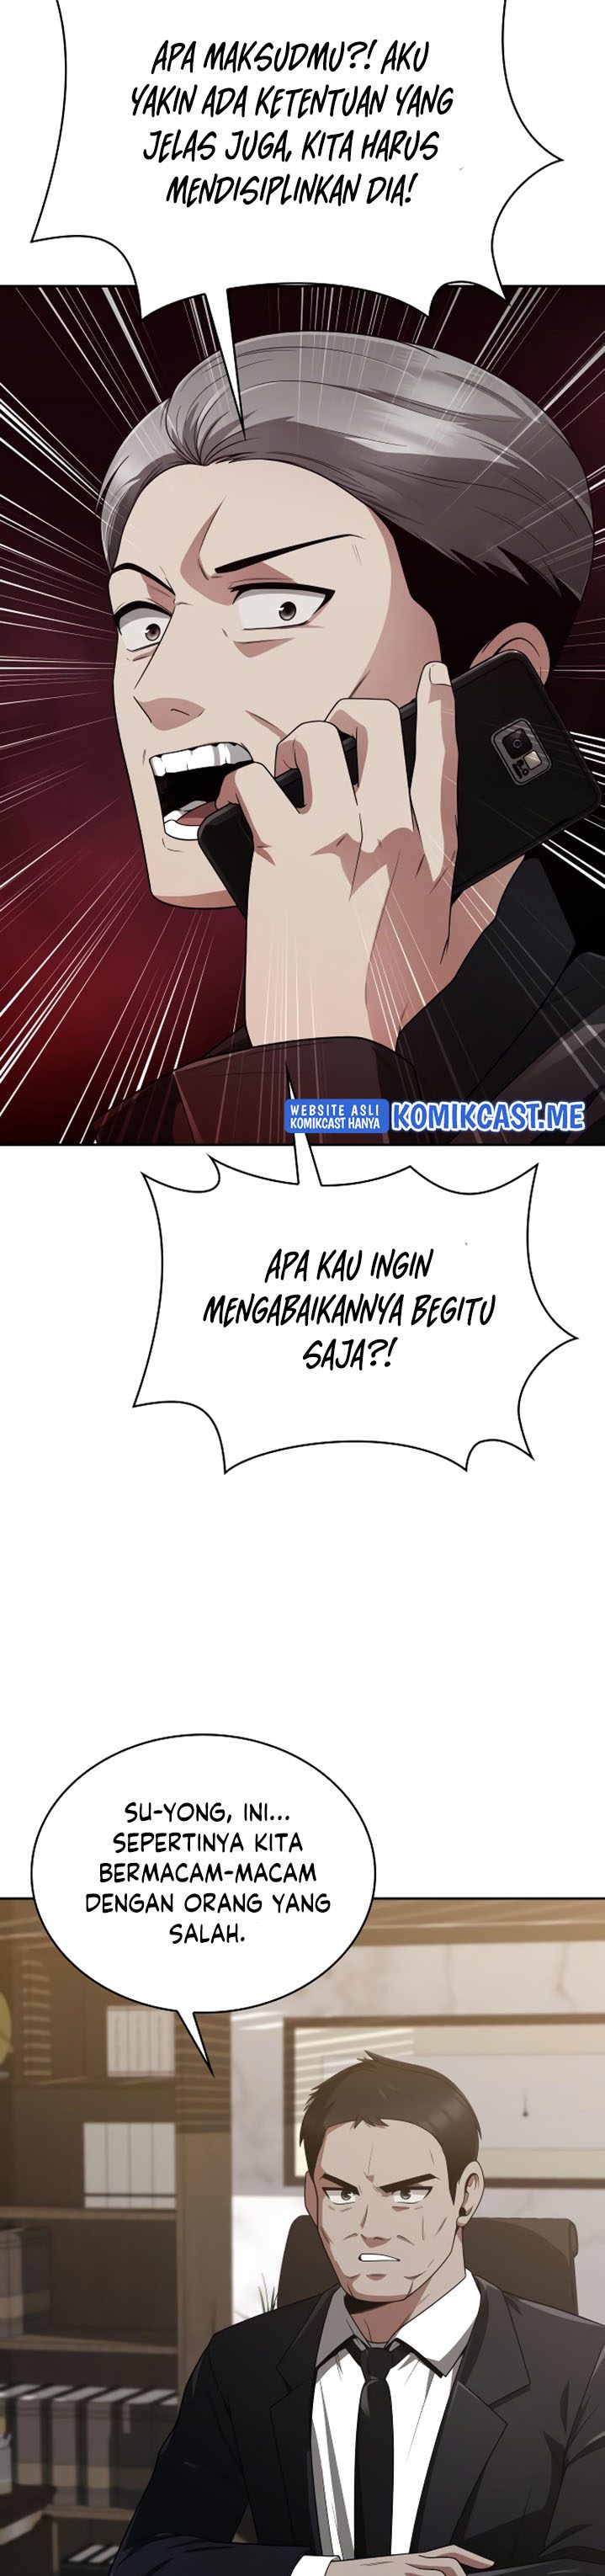 Dilarang COPAS - situs resmi www.mangacanblog.com - Komik clever cleaning life of the returned genius hunter 011 - chapter 11 12 Indonesia clever cleaning life of the returned genius hunter 011 - chapter 11 Terbaru 39|Baca Manga Komik Indonesia|Mangacan